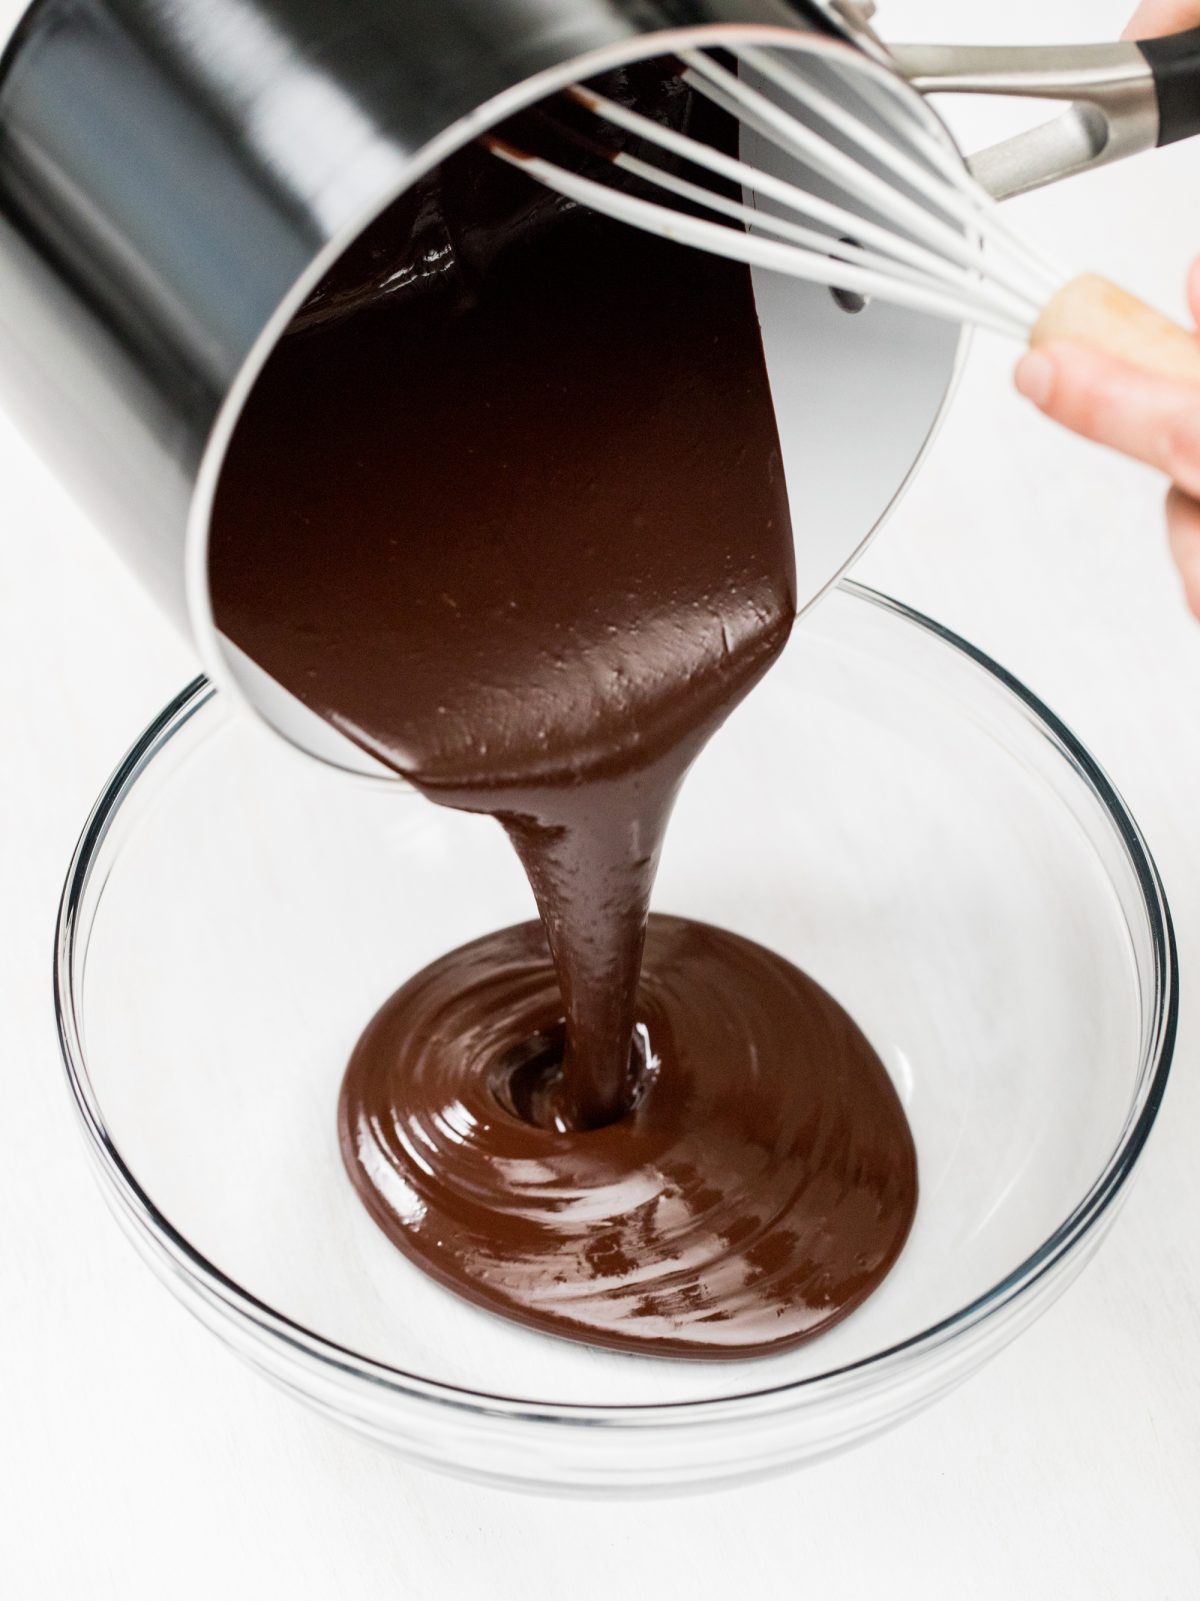 Pouring out the melted chocolate